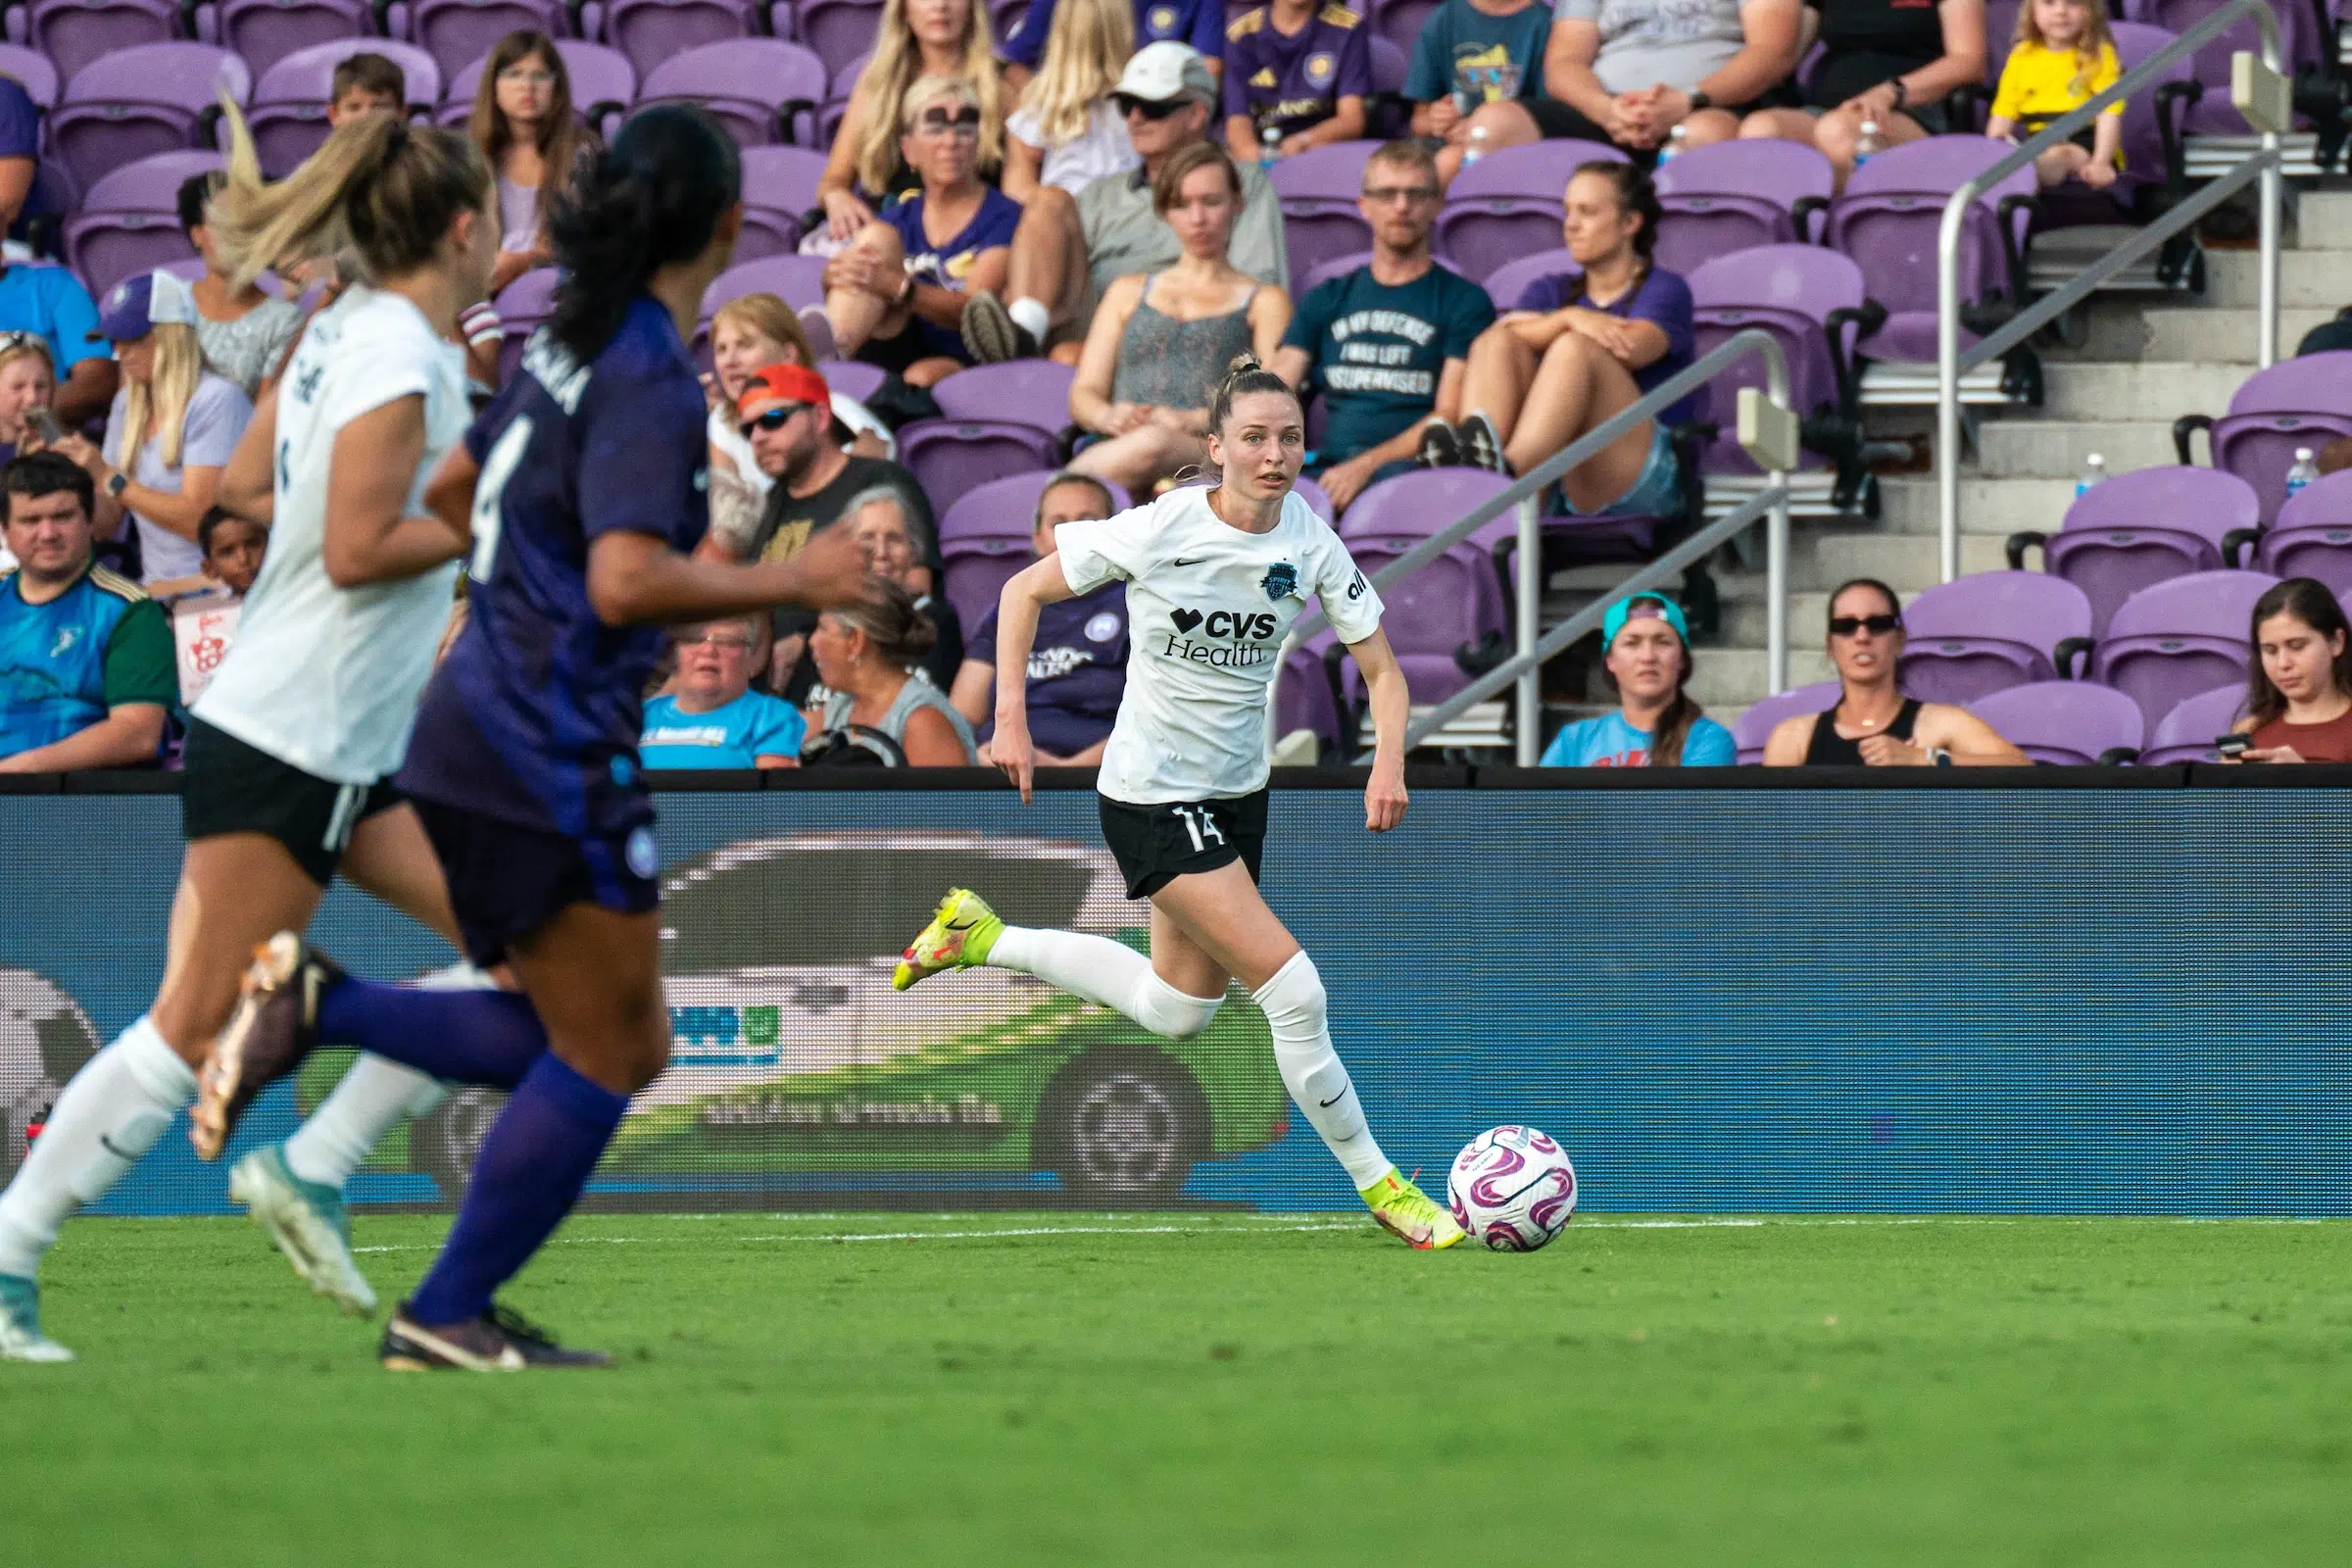 Gabby Carle in a white top, black shorts and white socks dribbles a soccer. In the foreground, two players are running out of focus.